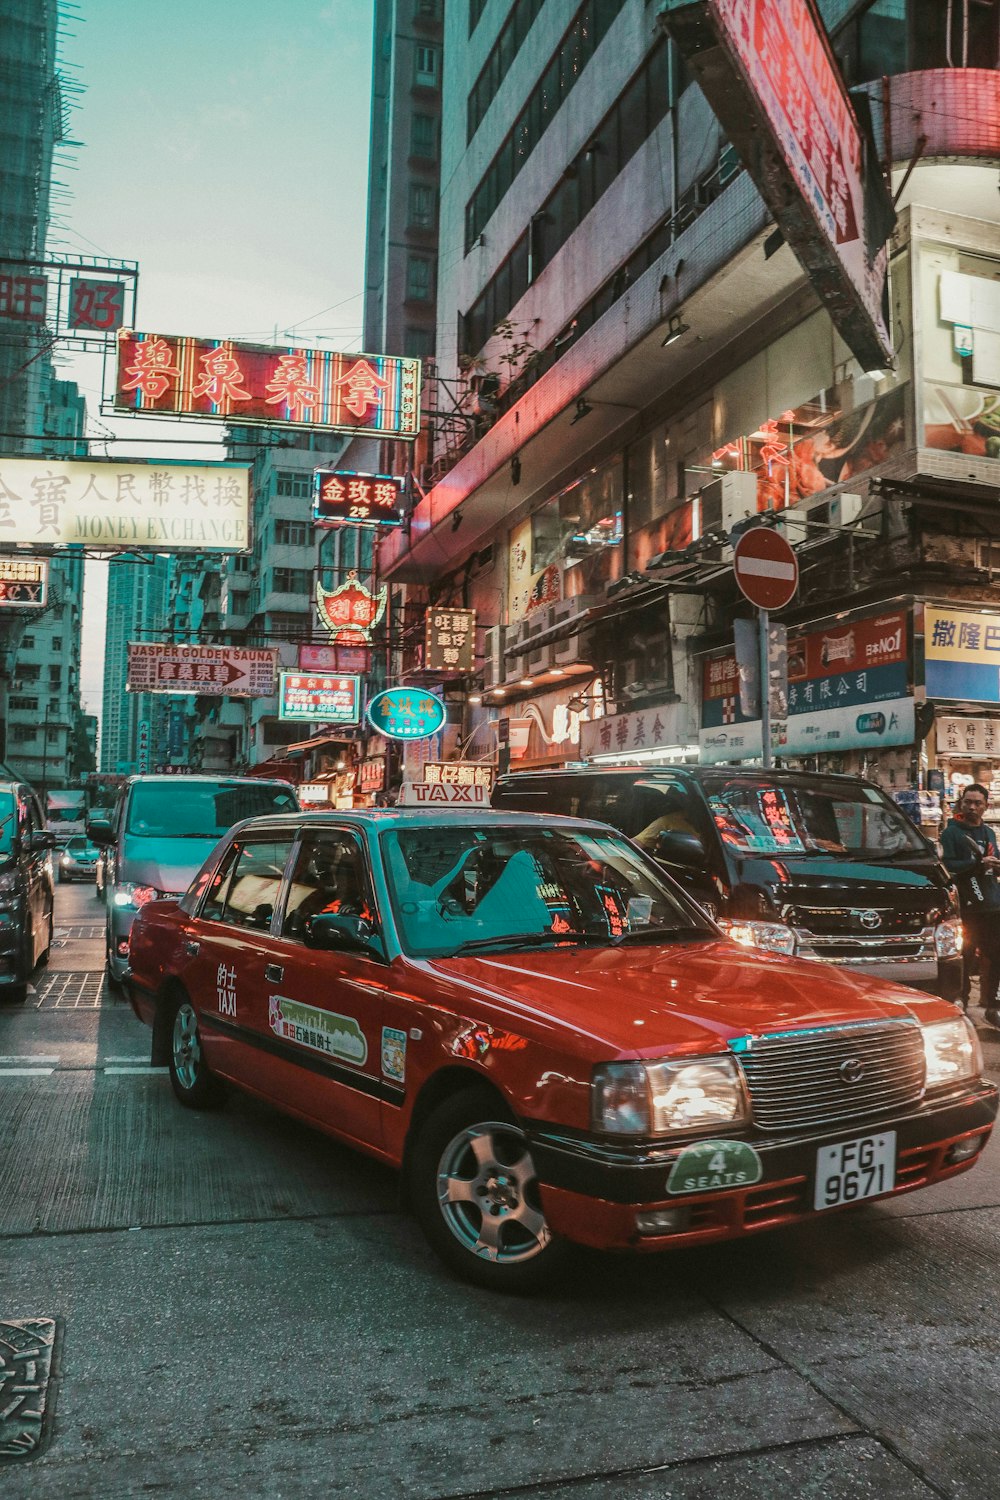 red taxi cab on Hong Kong street